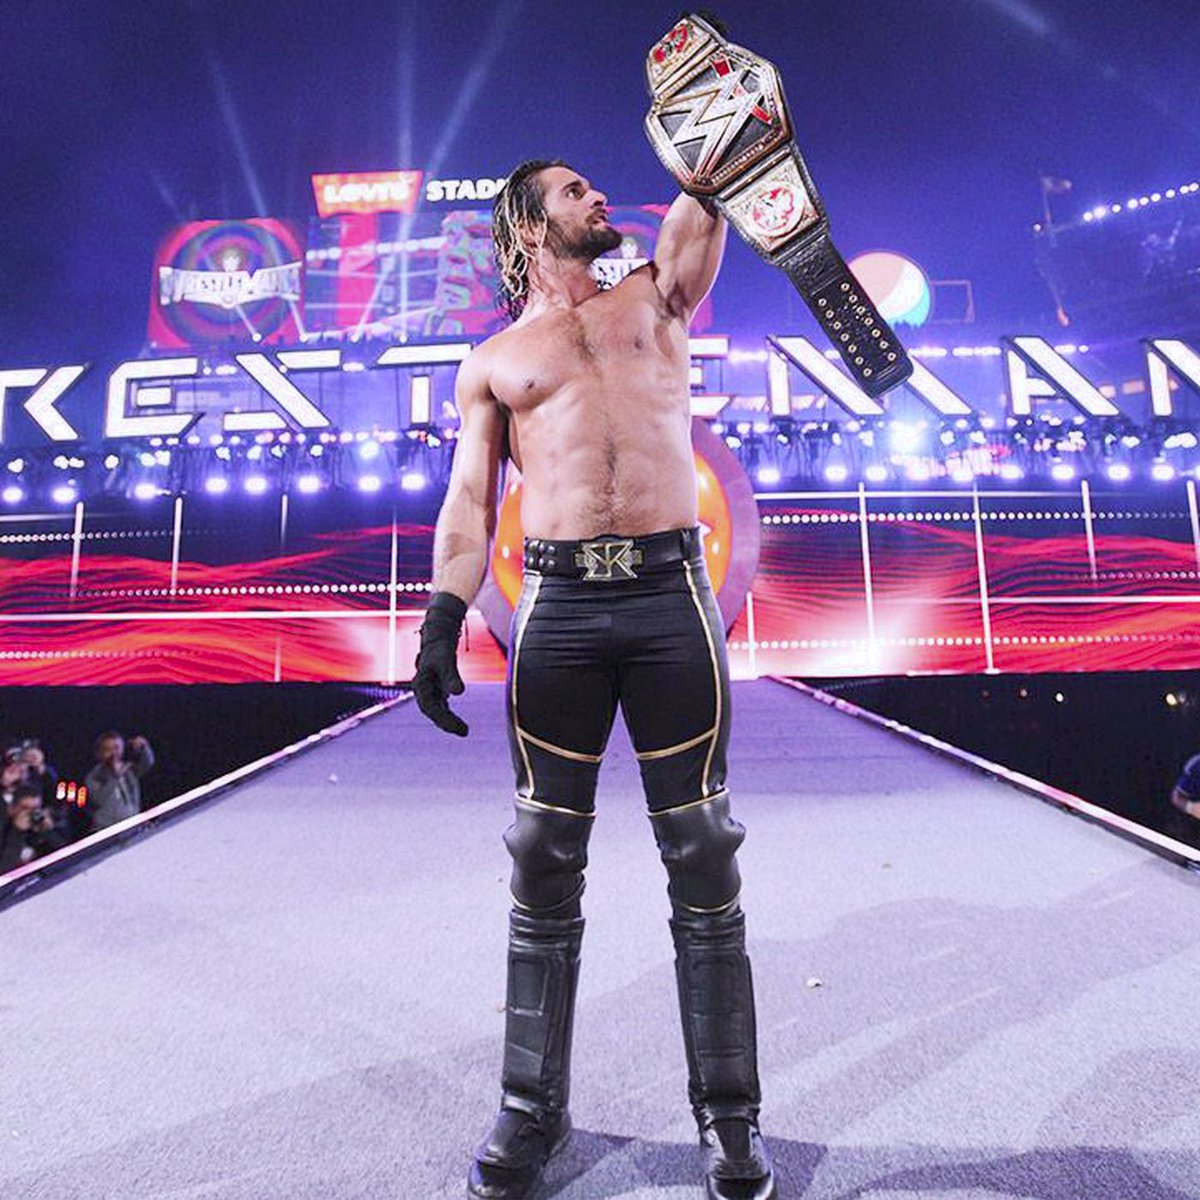 3/29/2015

Seth Rollins cashed in his Money in the Bank Briefcase to defeat Roman Reigns and Brock Lesnar to become the new WWE World Heavyweight Championship at Wrestlemania 31 from Levi's Stadium in Santa Clara, California.

#WWE #WrestleMania31 #TripleThreatMatch